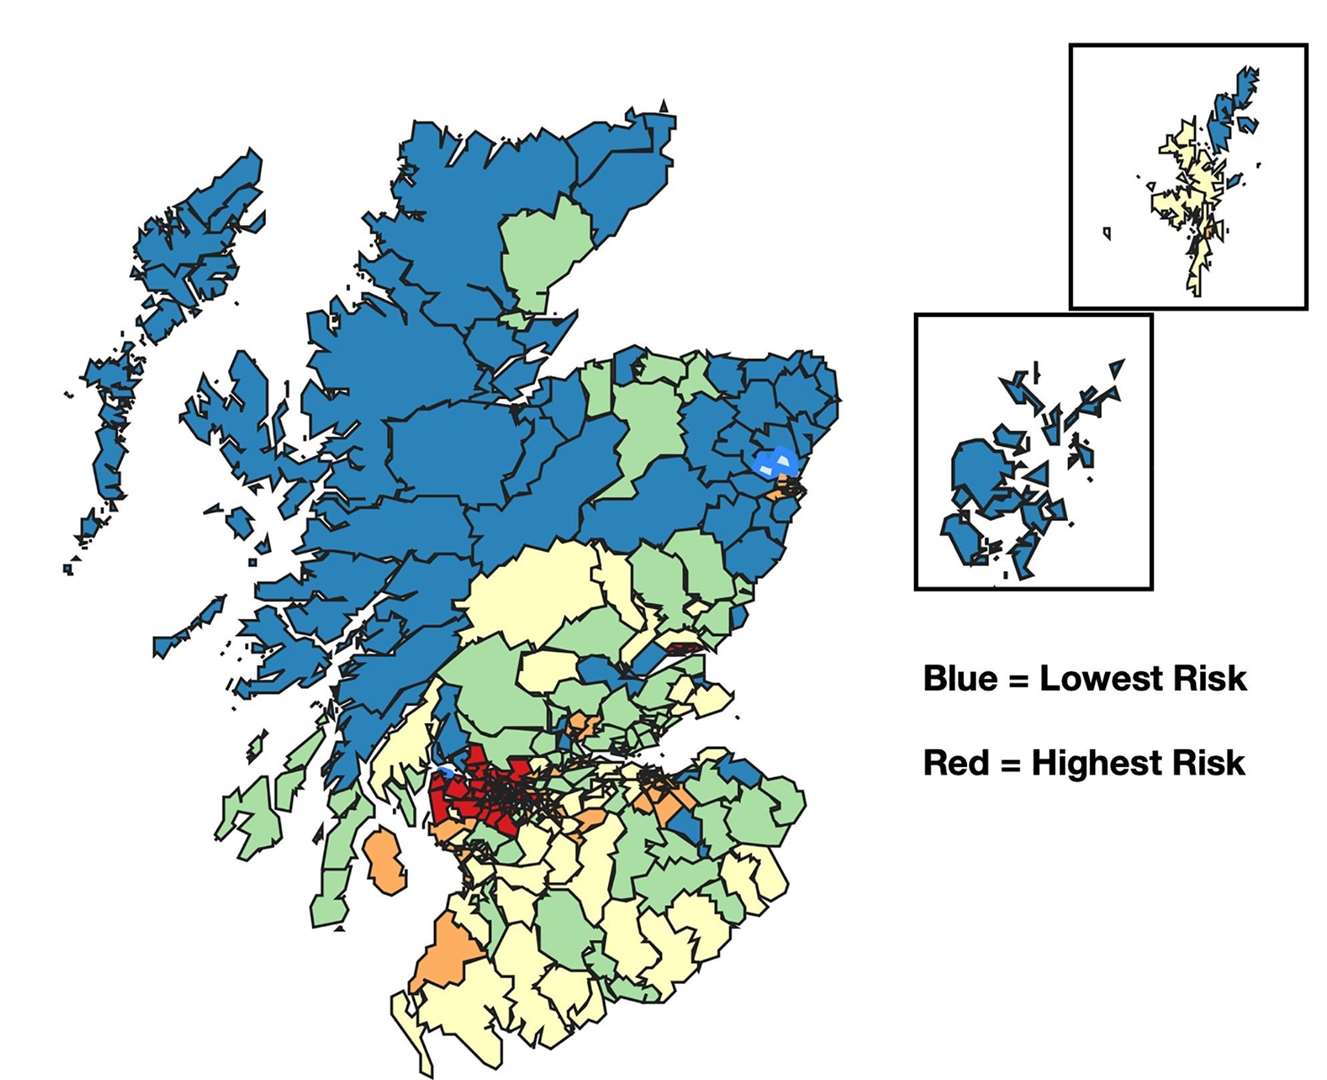 The Scotianomics Covid-19 community risk monitor map shows Caithness highlighted in blue as a low-risk area.